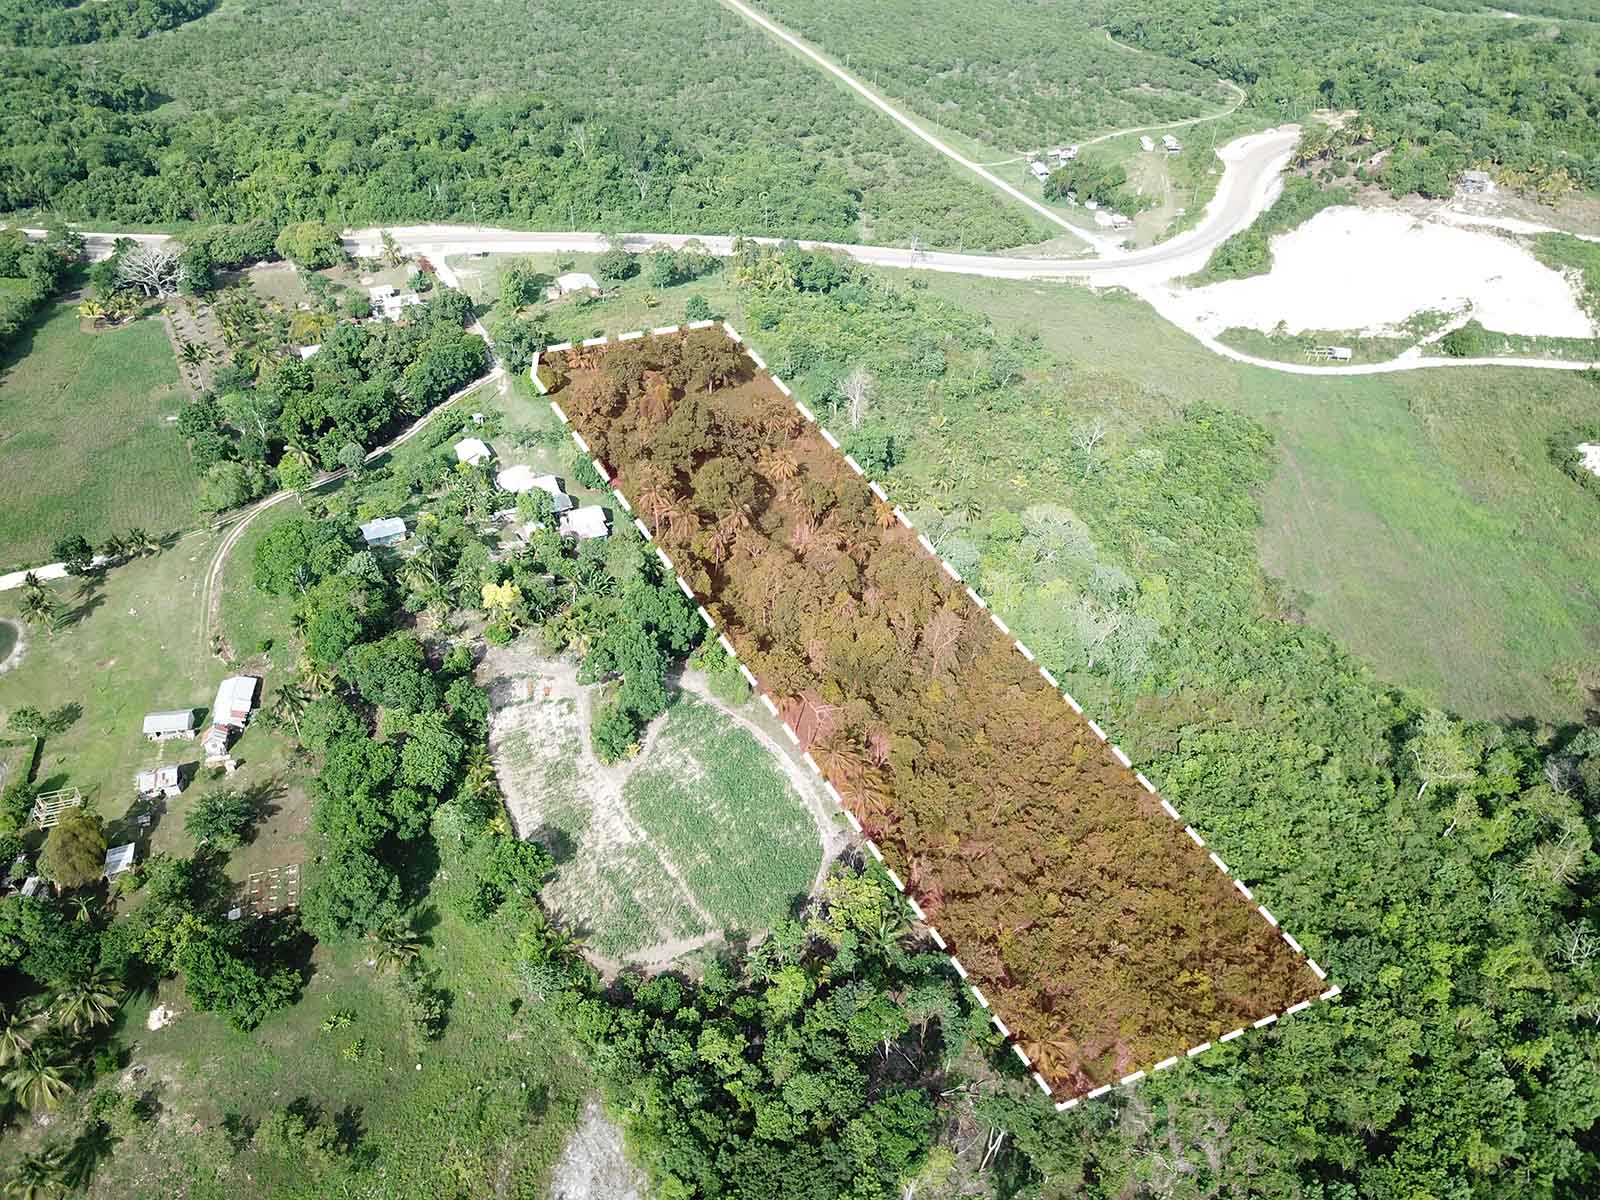 FOR-SALE: 8.2 Acre Farm Land in Georgeville, Cayo Belize.